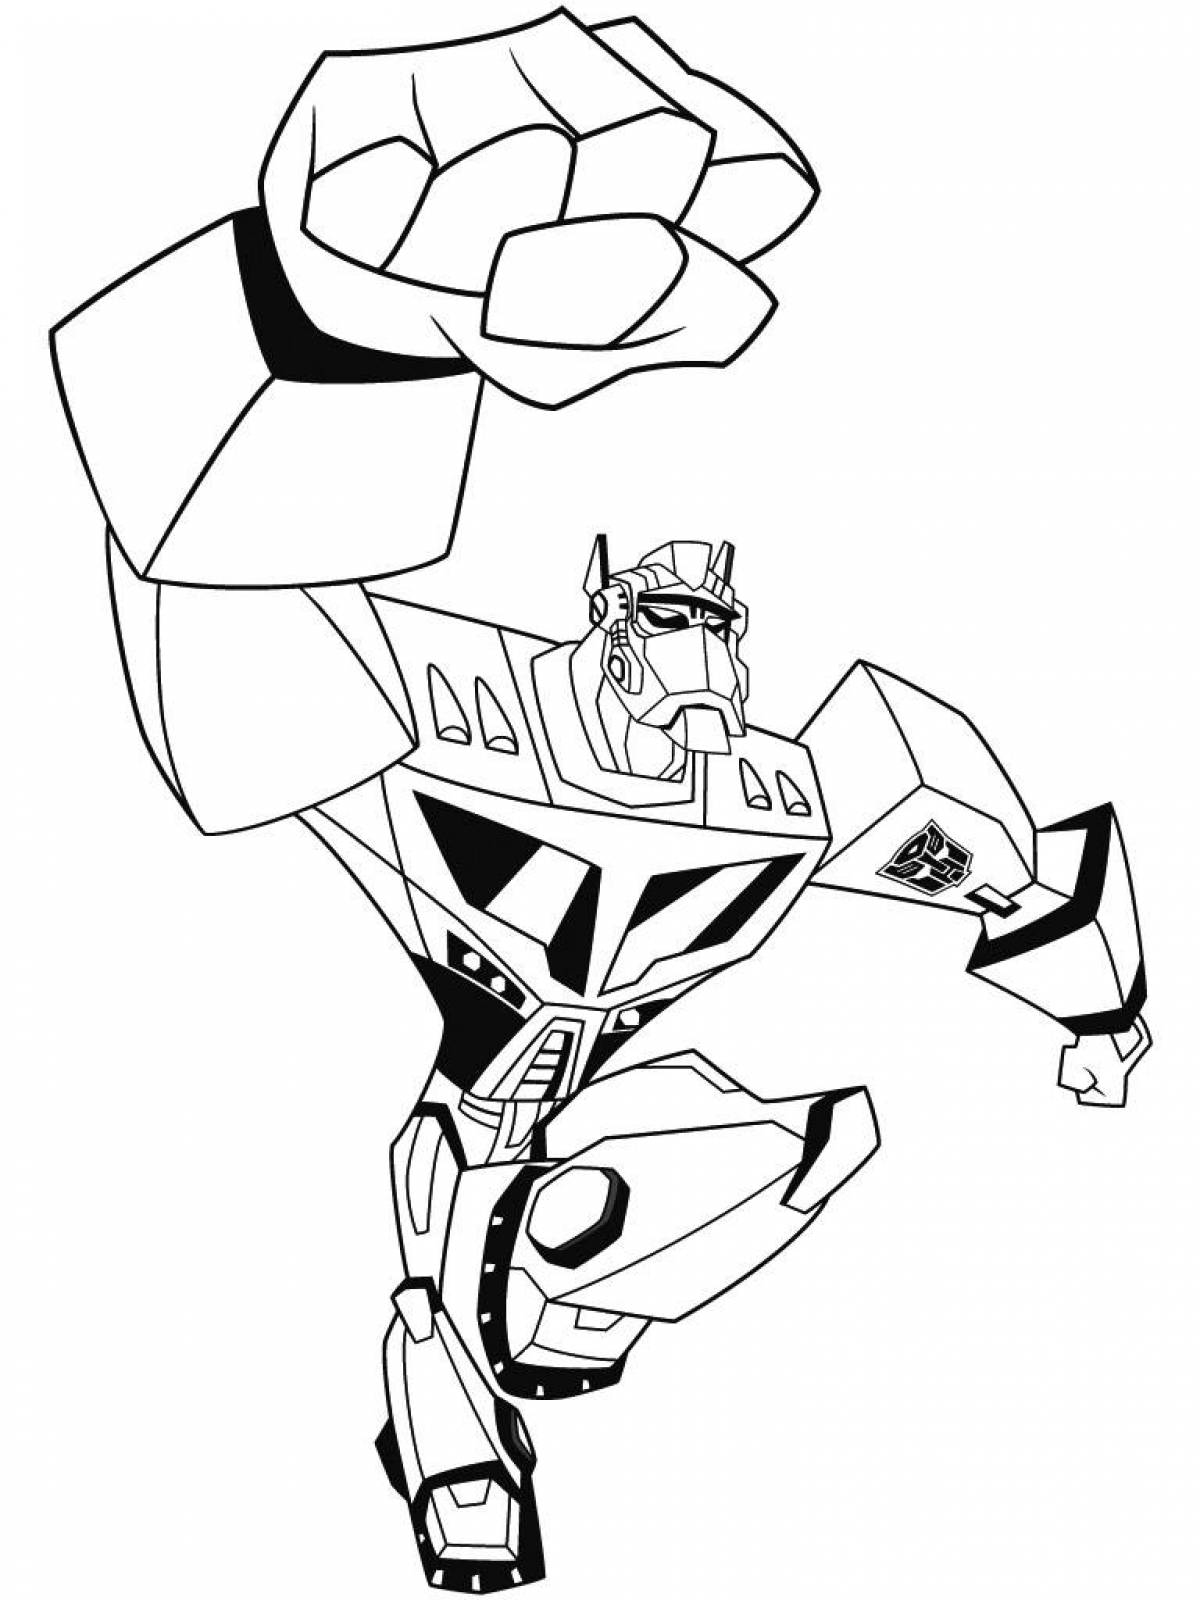 Cute bumblebee coloring pages for kids